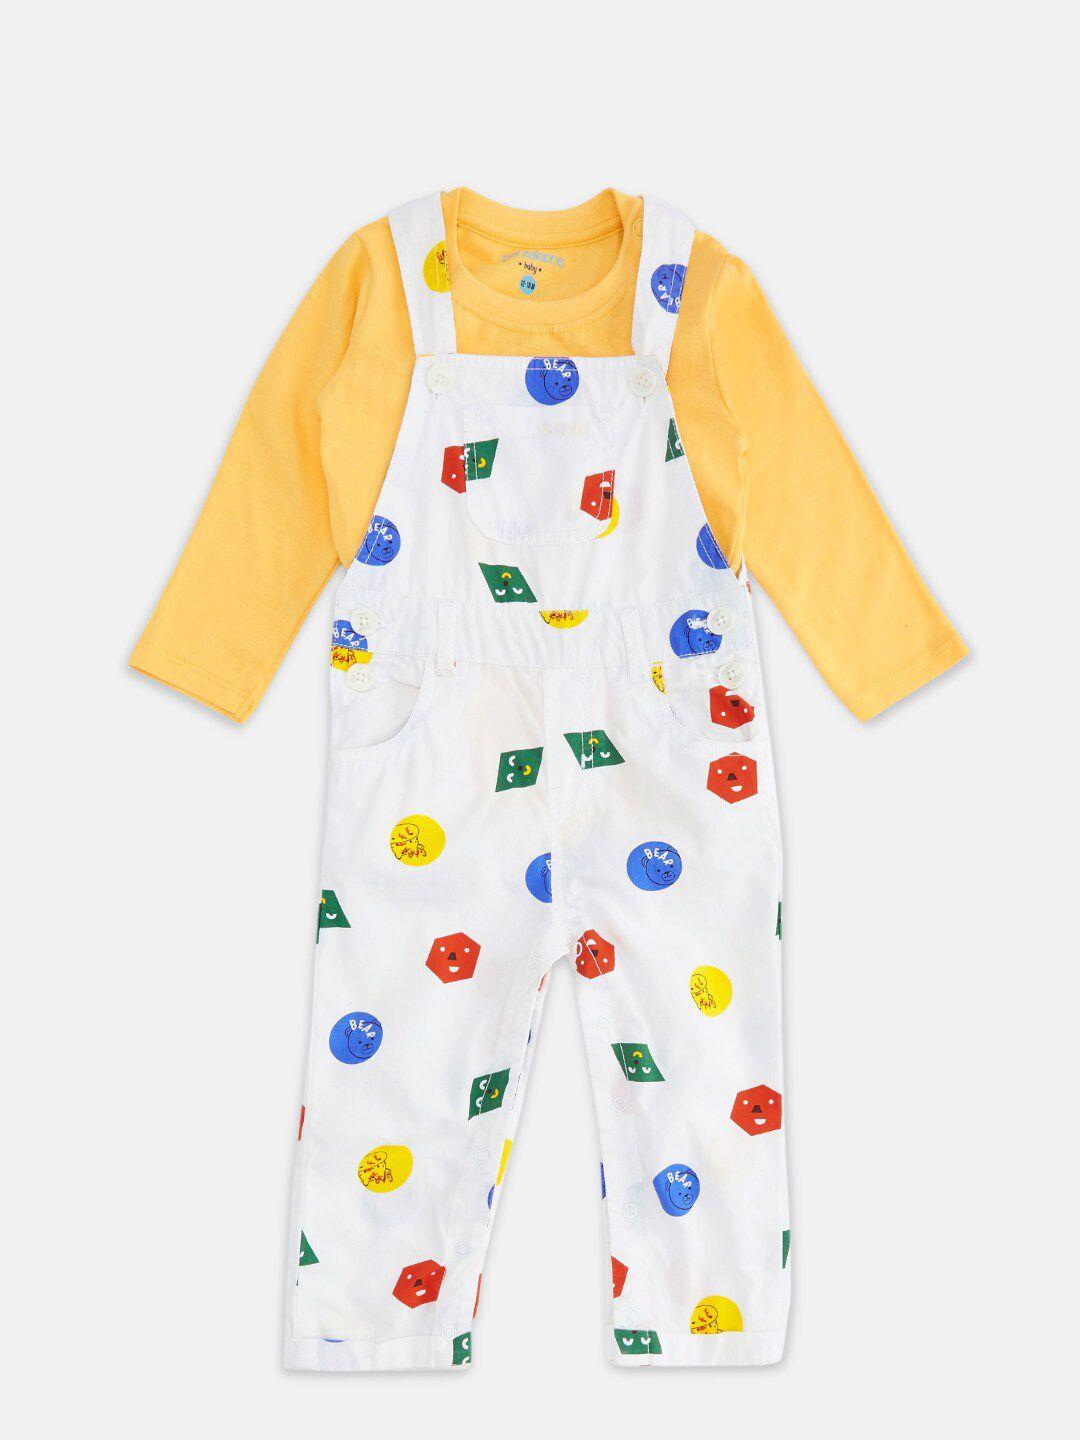 pantaloons-baby-boys-white-&-yellow-printed-pure-cotton-t-shirt-with-dungaree